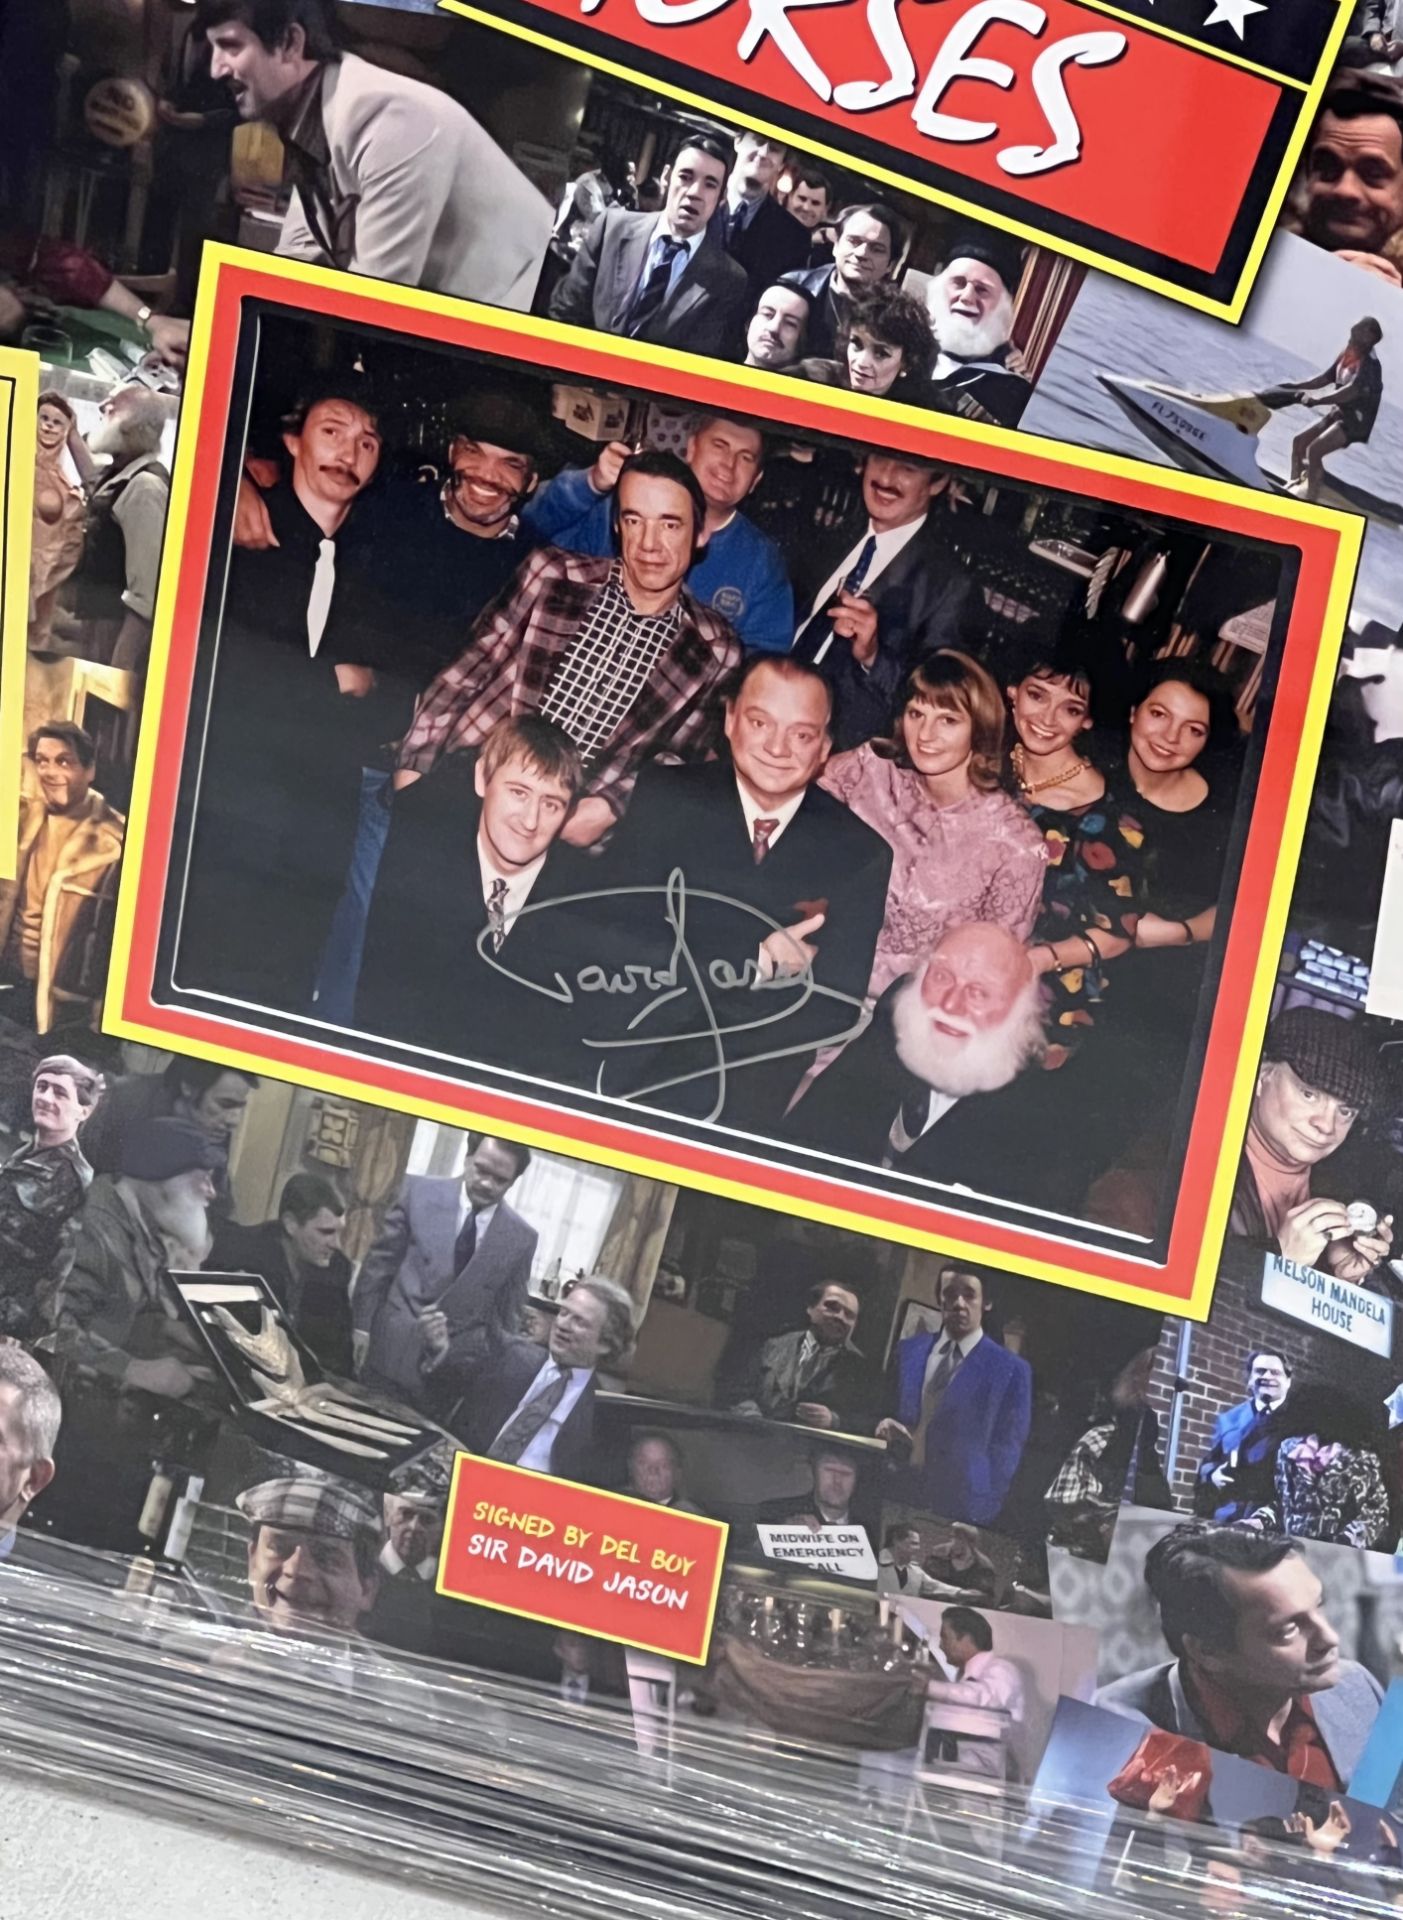 ONLY FOOLS & HORSES PRESENTATION, HAND SIGNED BY ‘SIR DAVID JASON’ WITH COA - NO VAT! - Image 3 of 6